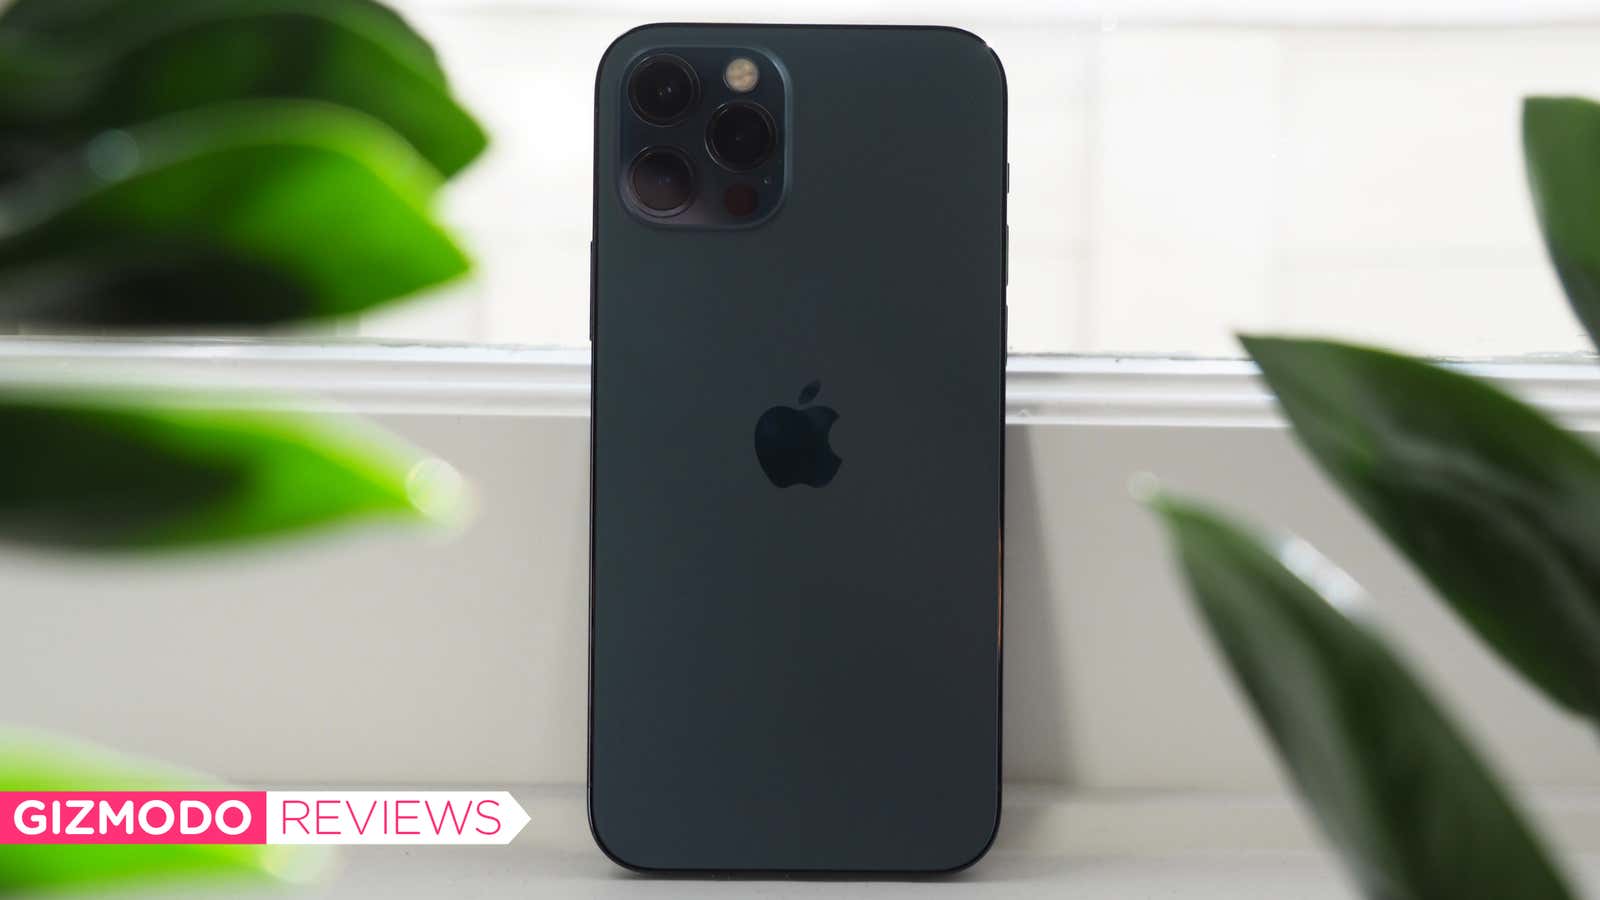 Apple Inc.: iPhone 12 Pro review: Apple has upped 'Pro game' with